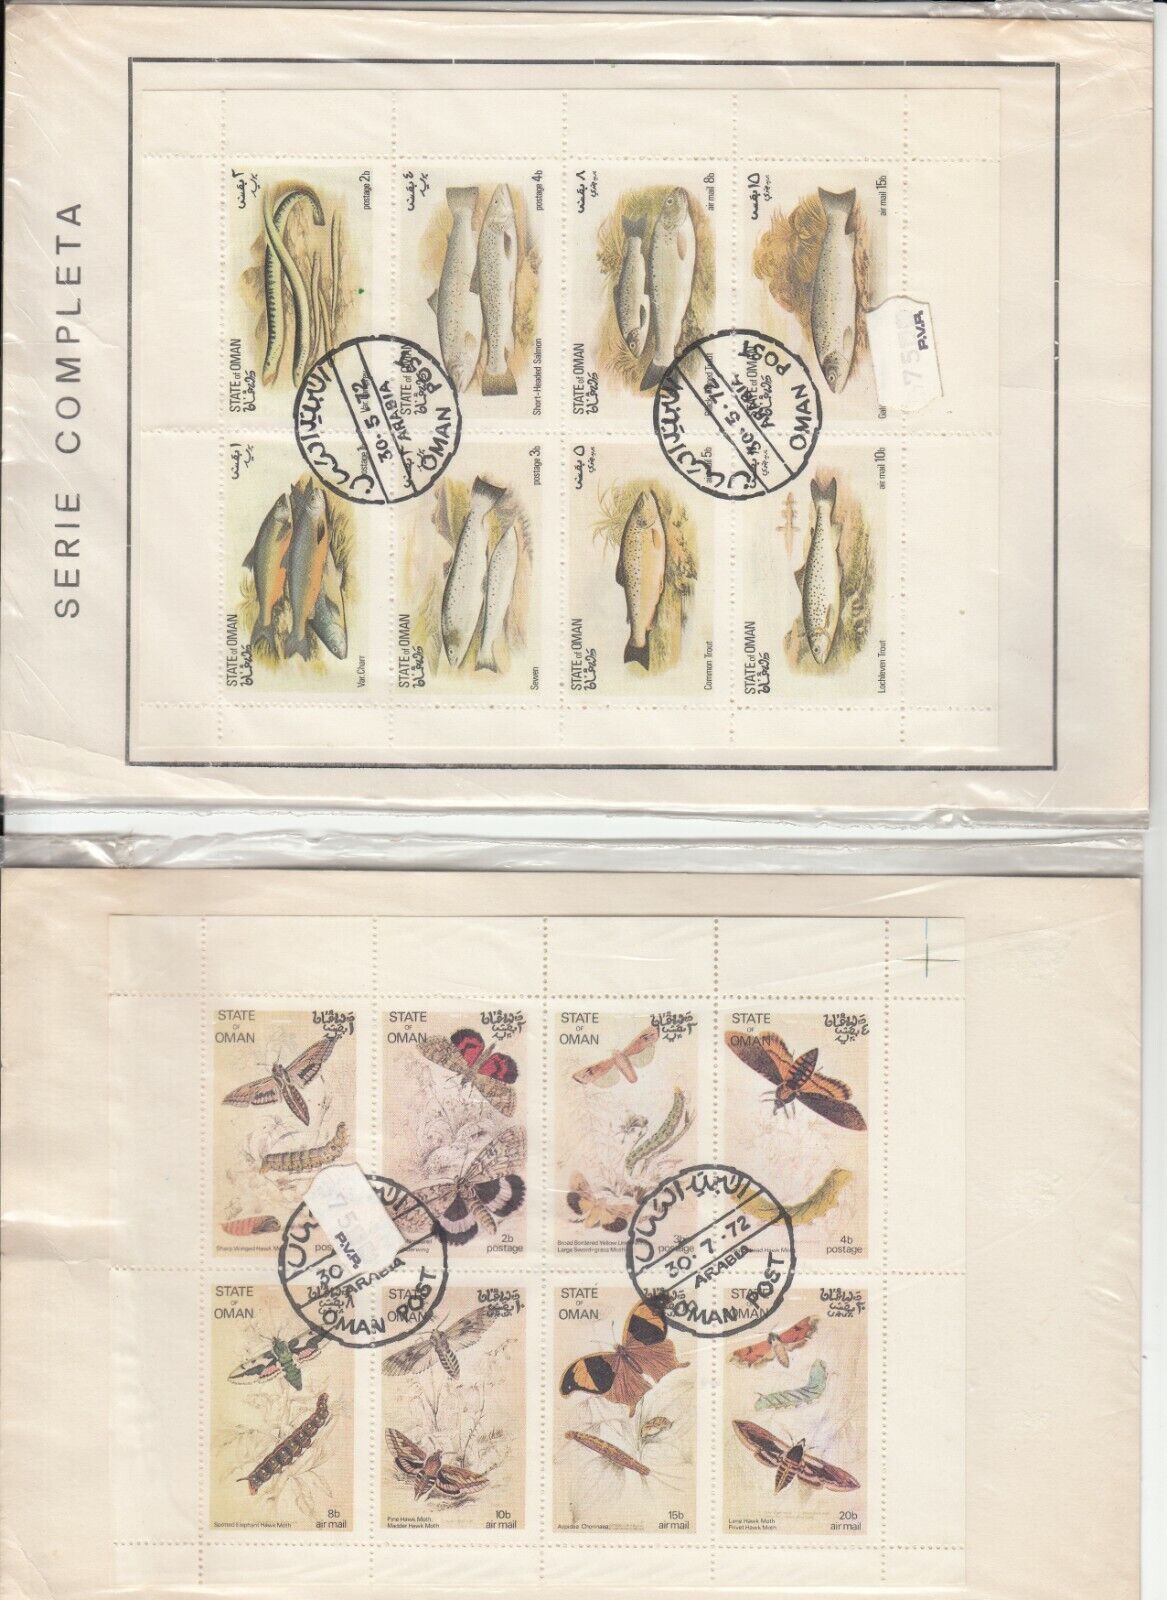 State of Oman 1977 2 Mini Fish quality Brand new assurance amd CTO Sheets Moths Cancelled